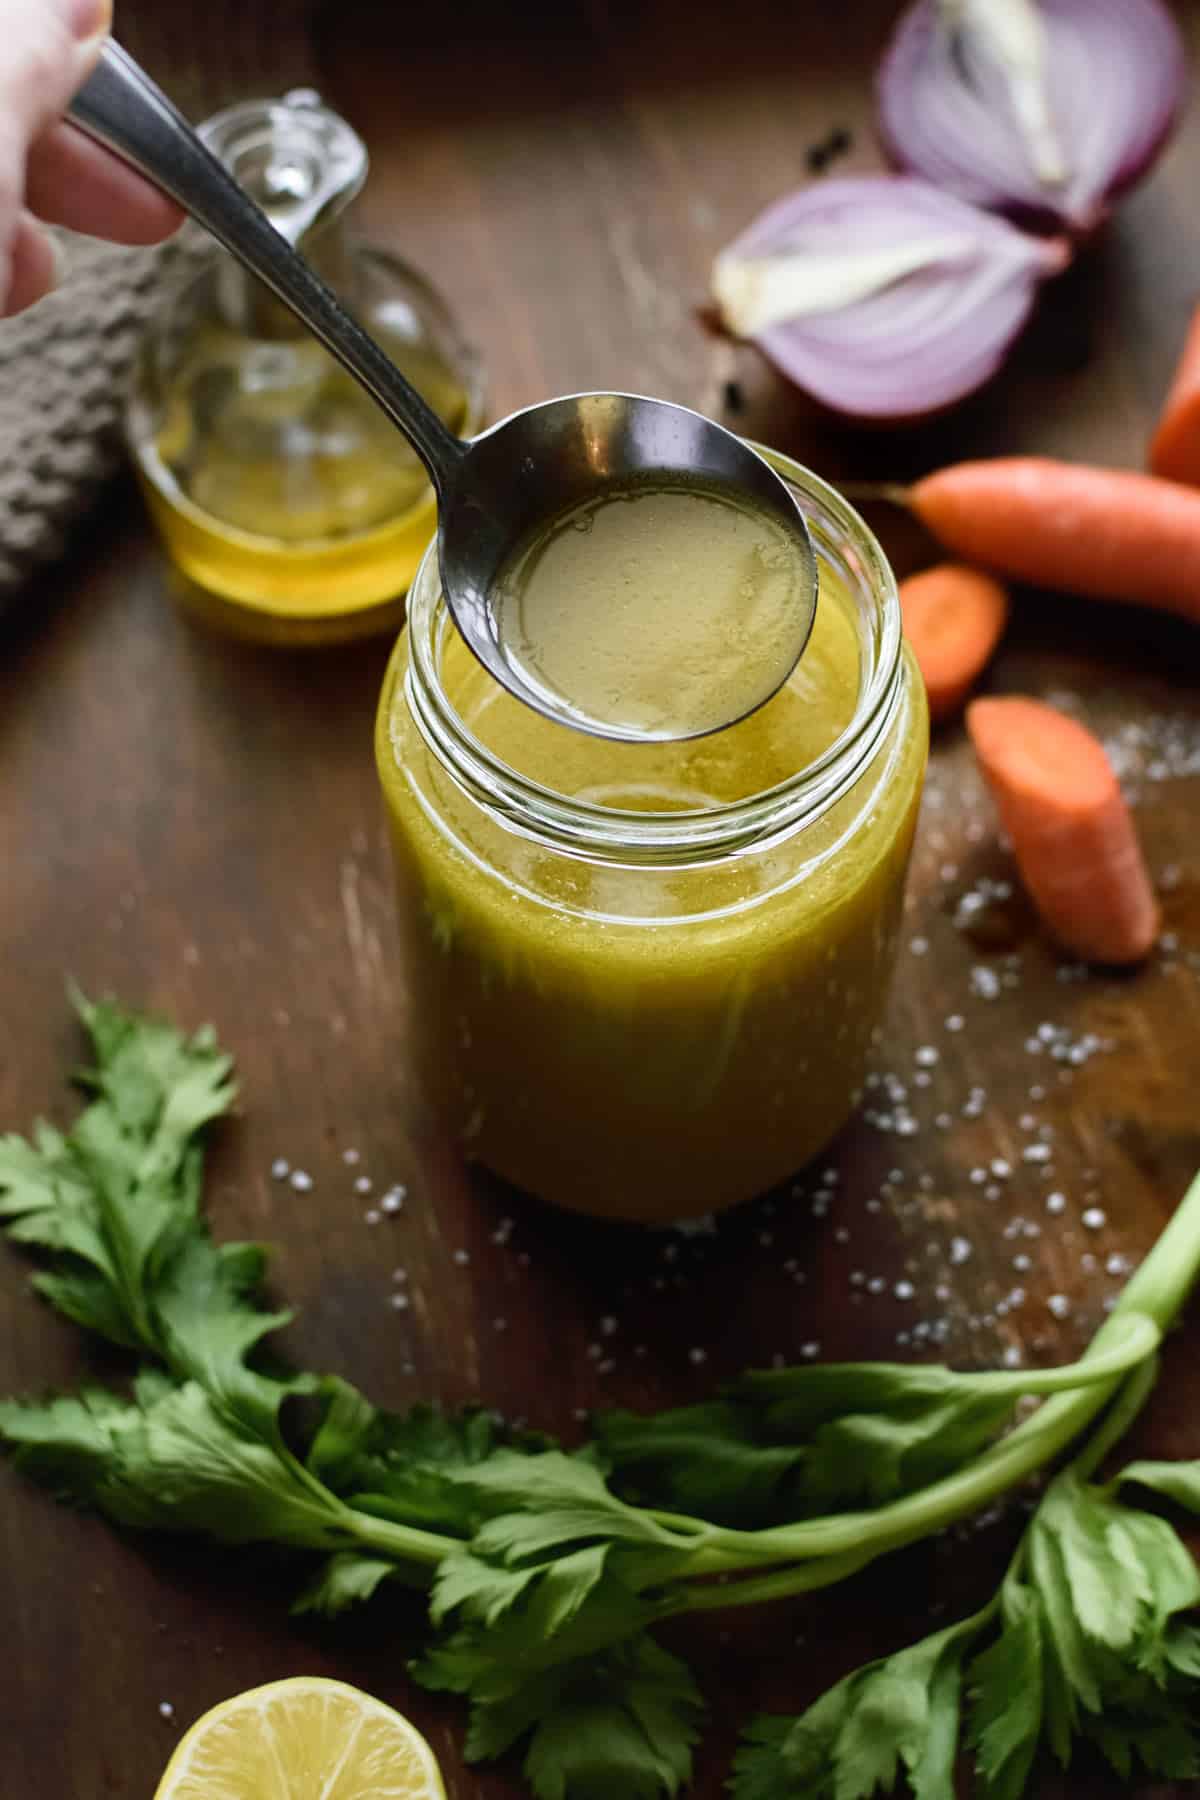 How To Make Chicken Stock Easy At Home